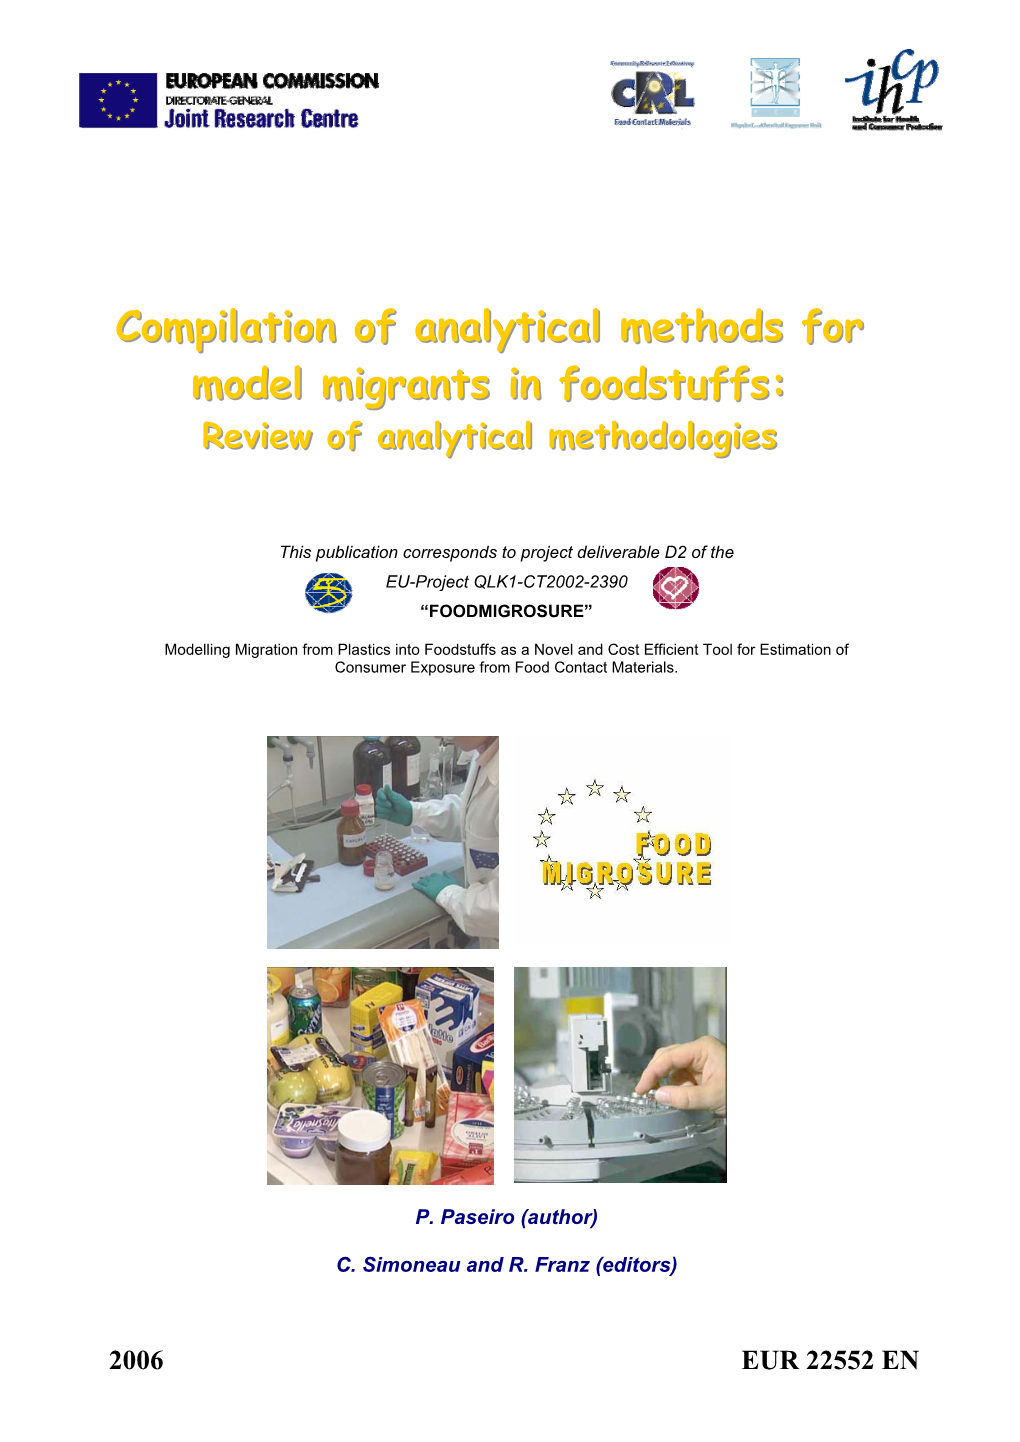 Compilation of Analytical Methods for Model Migrants in Foodstuffs: Review of Analytical Methodologies